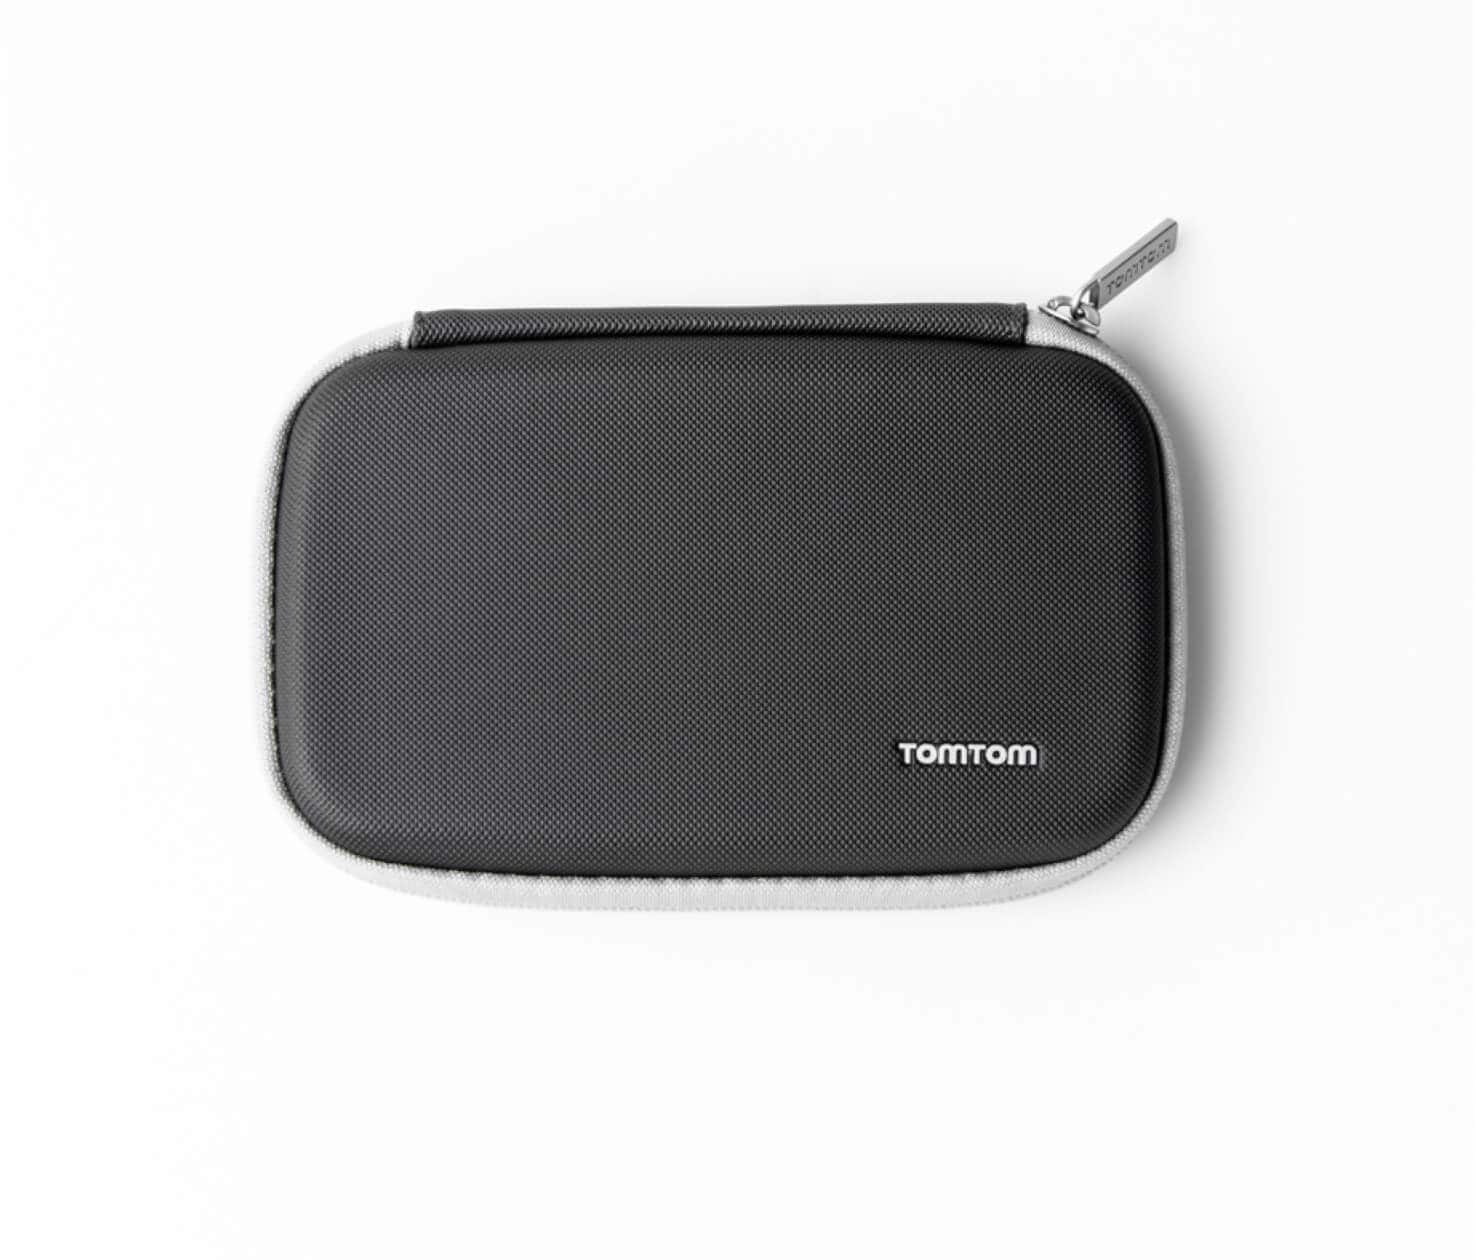 TomTom GPS Accessory